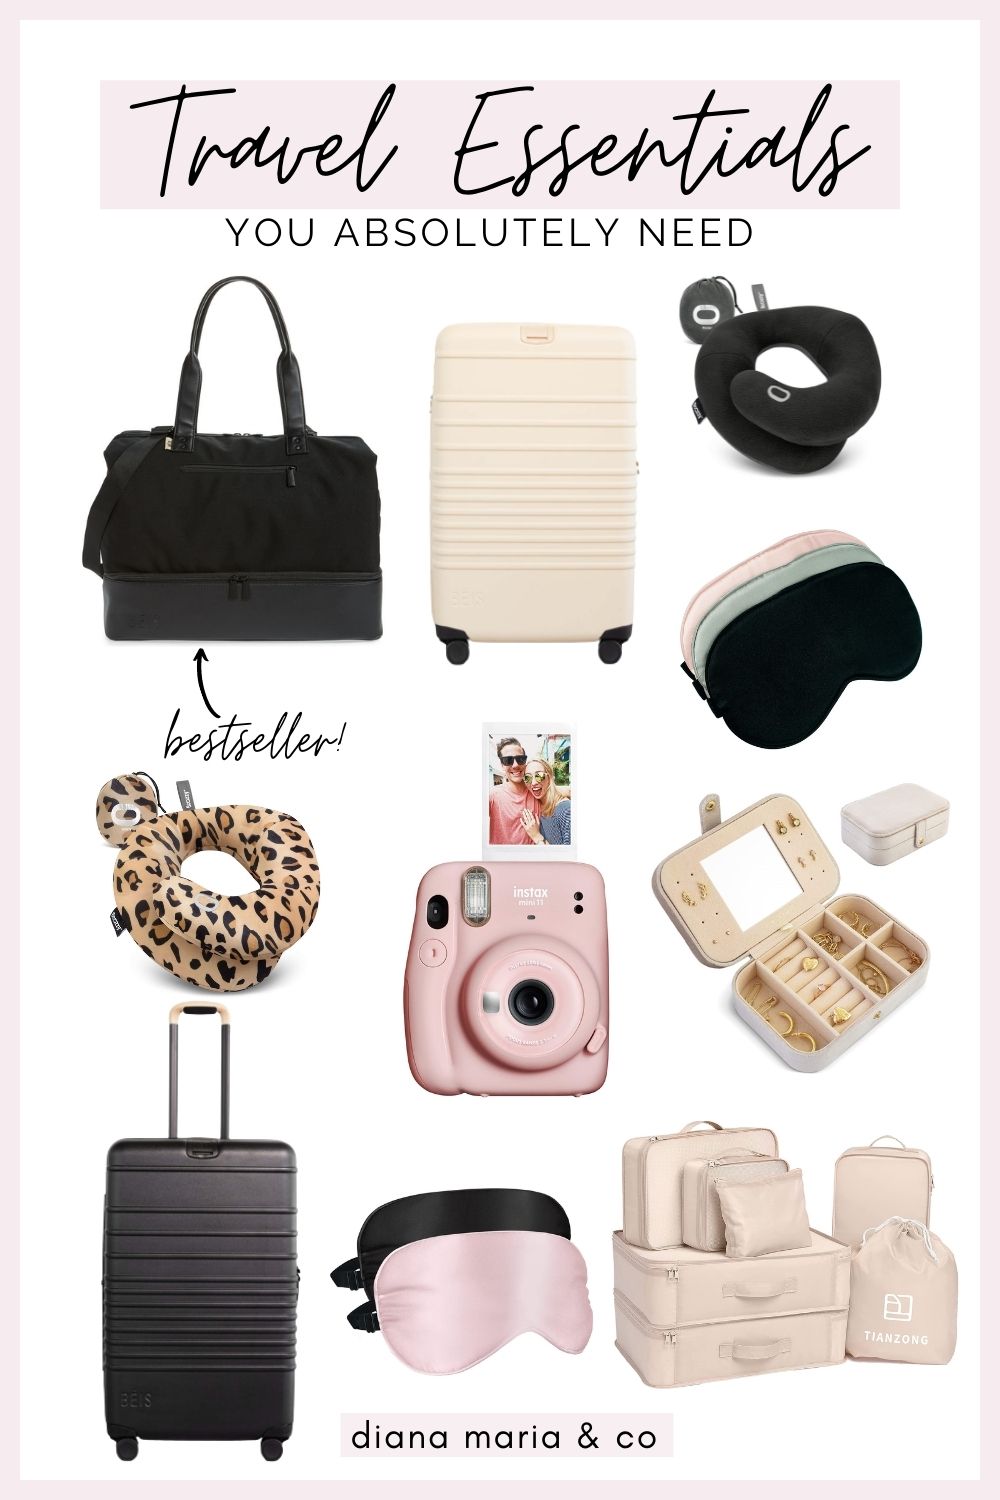 9 Travel Essentials You Need For Your Next Trip - Diana Maria & Co